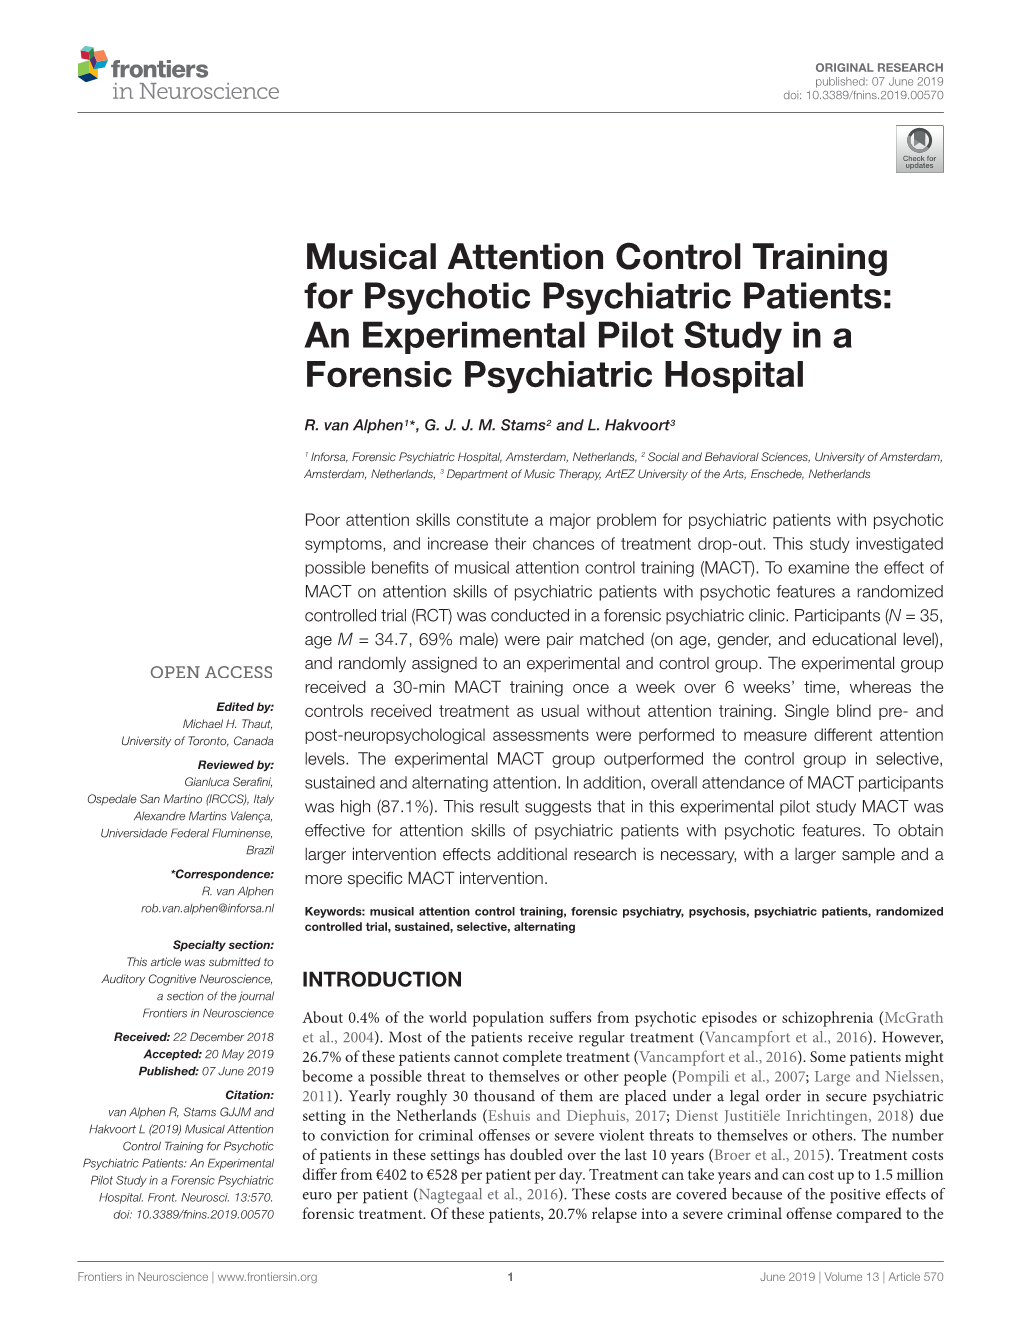 Musical Attention Control Training for Psychotic Psychiatric Patients: an Experimental Pilot Study in a Forensic Psychiatric Hospital